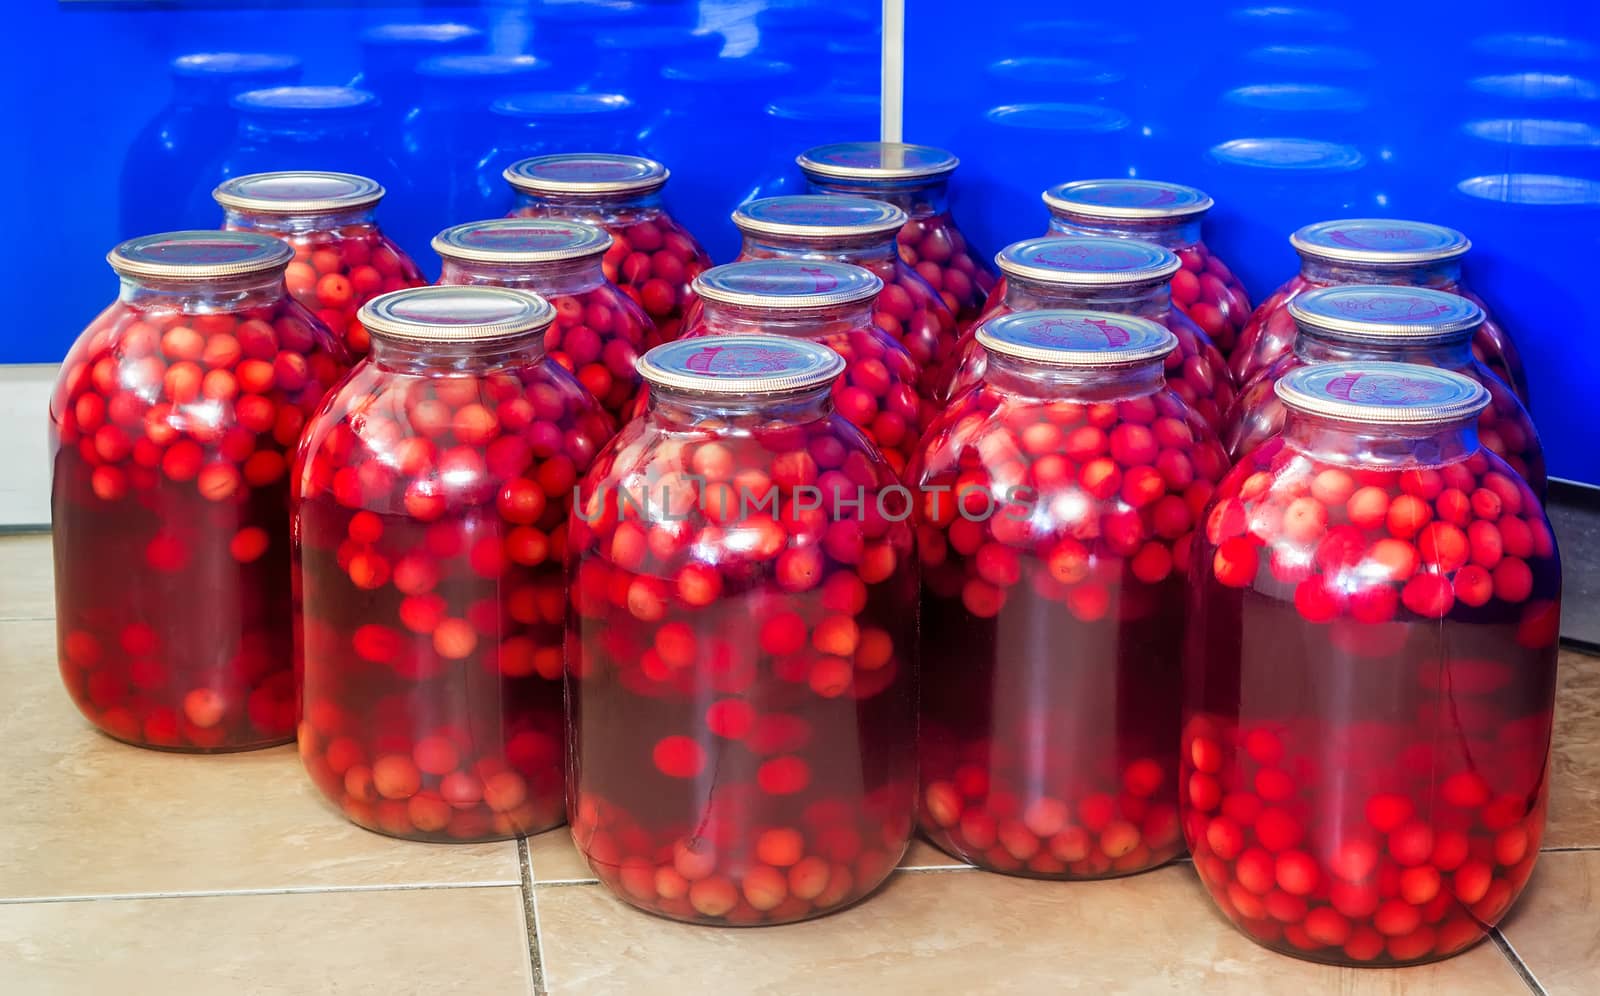 Home canning: large glass cylinders with cherry compote. by georgina198